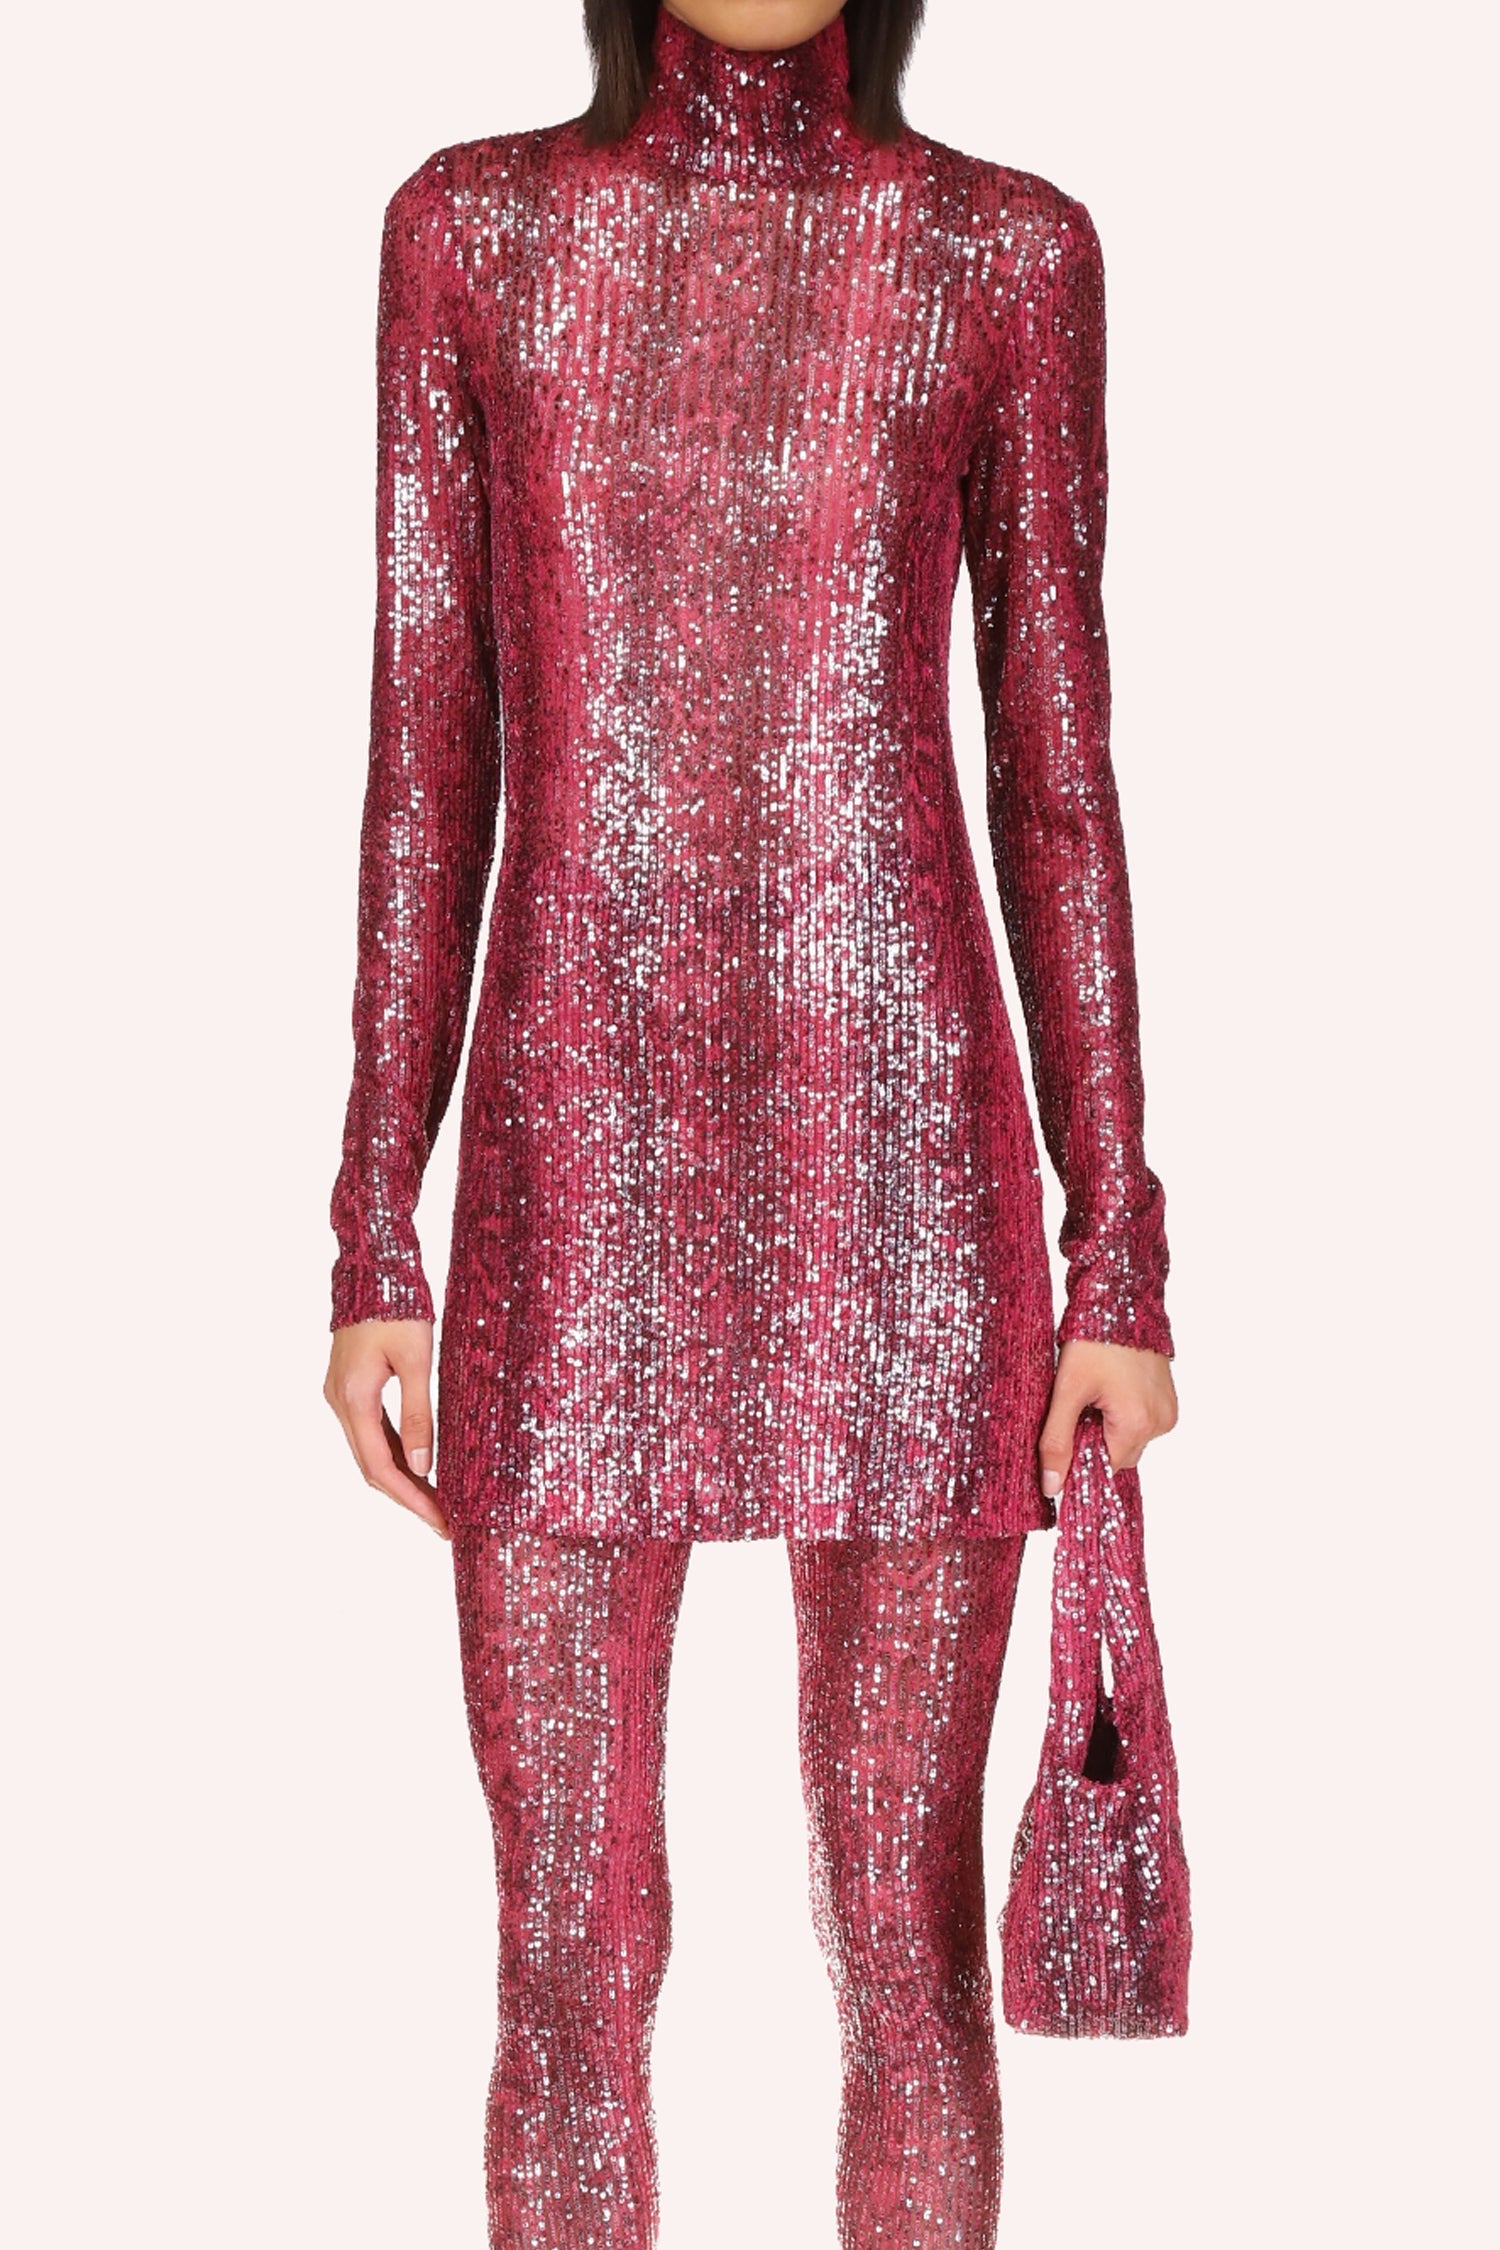 Snakeskin Sequin Turtleneck Dress  Ruby Multi  by Anna Sui